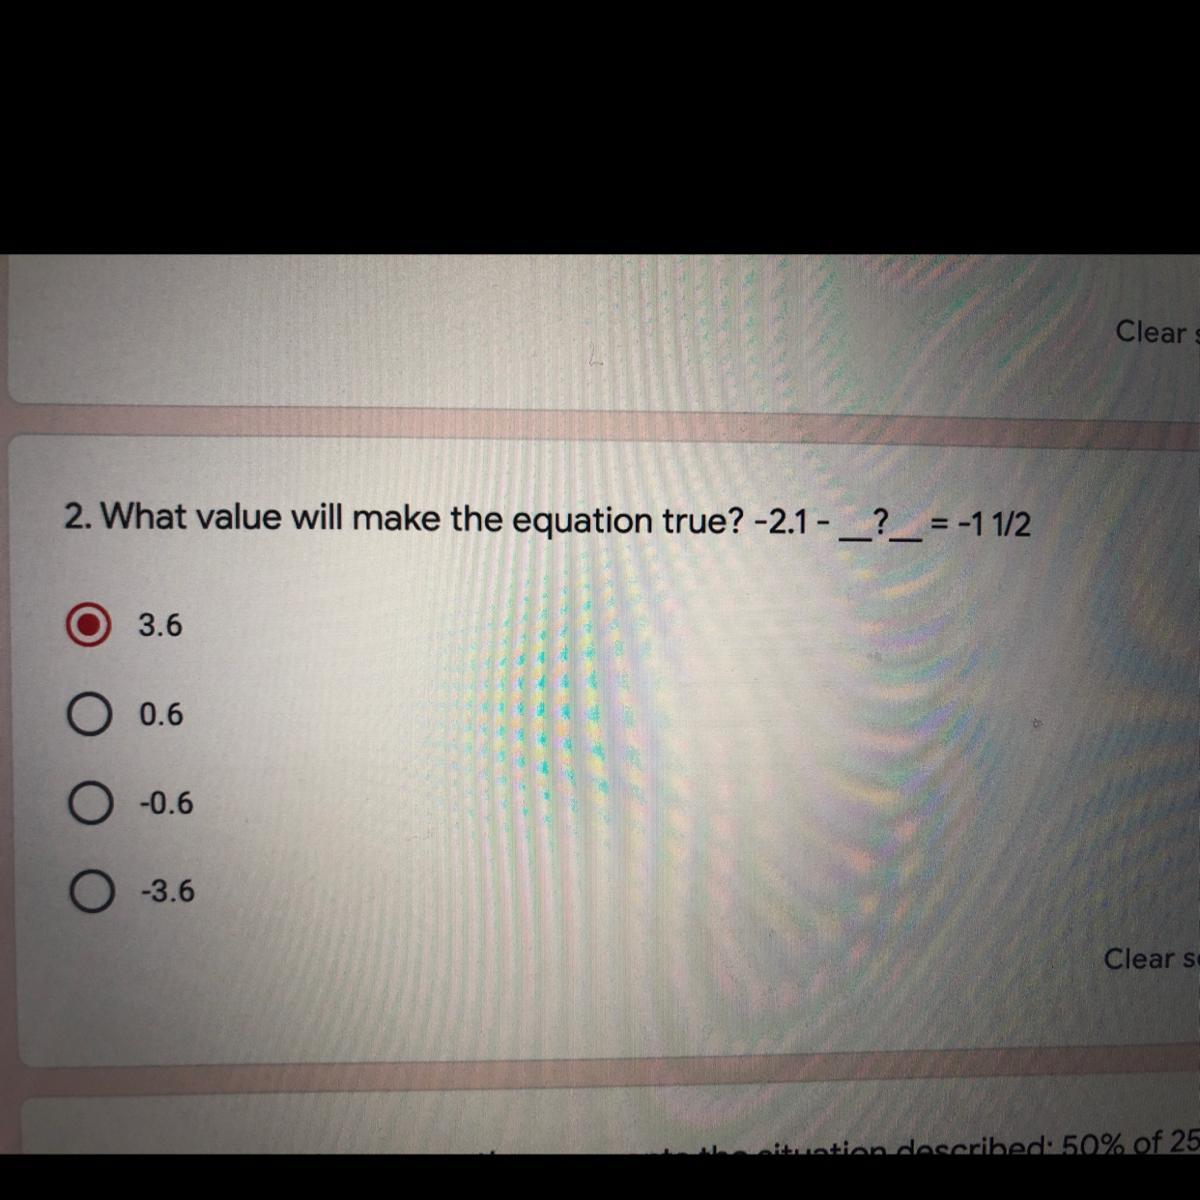 Can Someone Please Help Me Figure Out This Problem. Thanks 